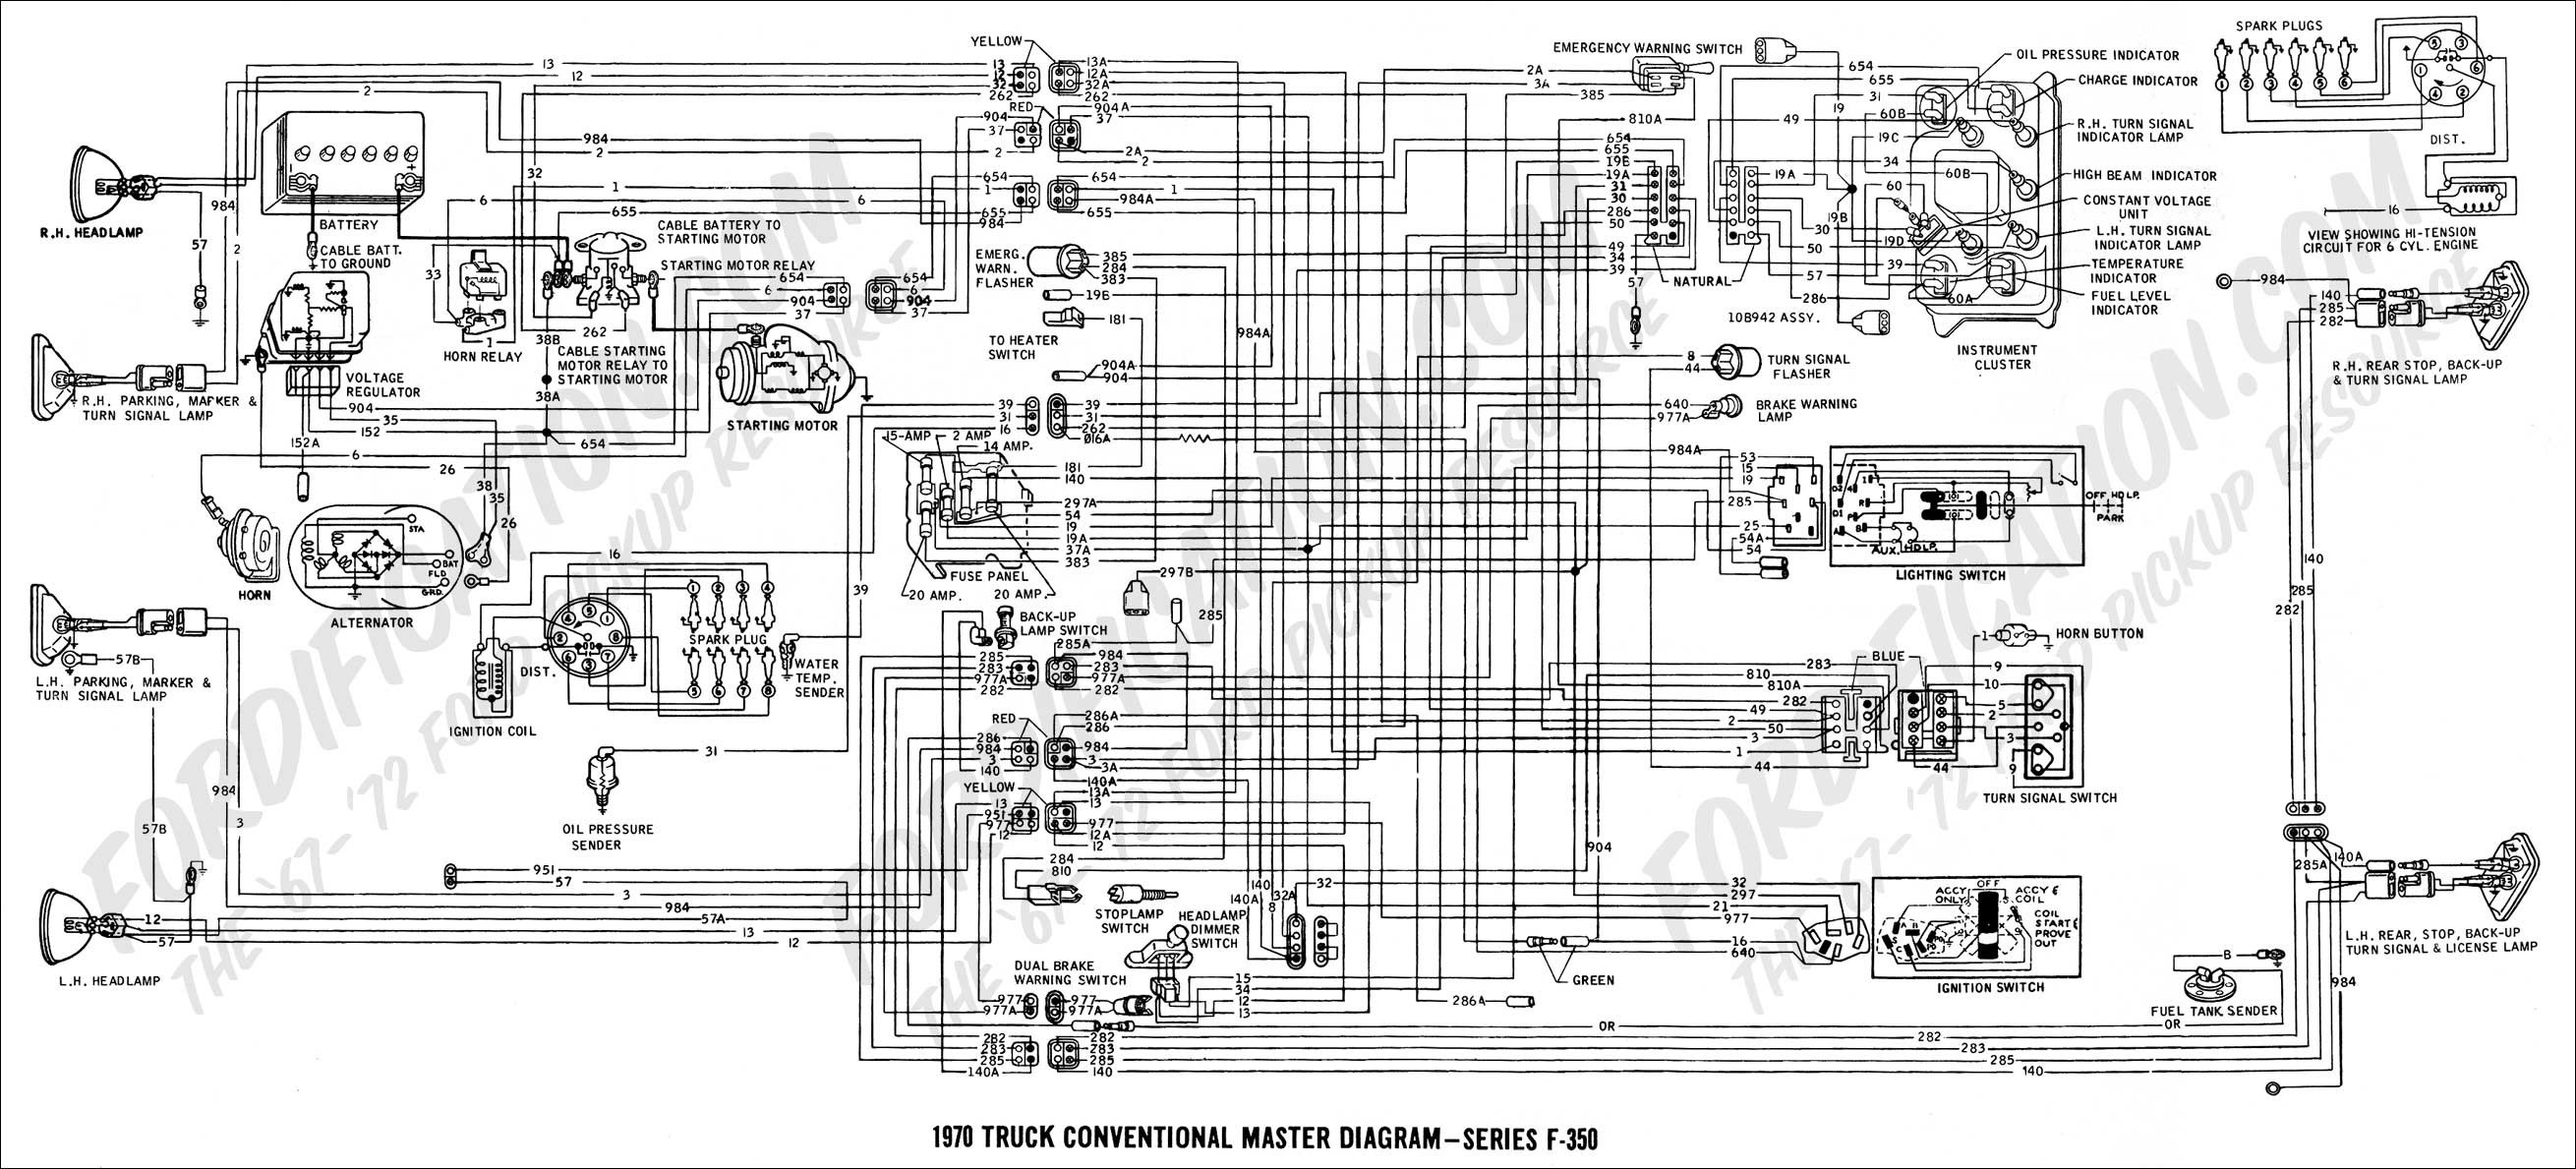 3400 Sfi Engine Diagram F250 2002 7 3 Automatic Transmission Wiring Harness Worksheet and Of 3400 Sfi Engine Diagram